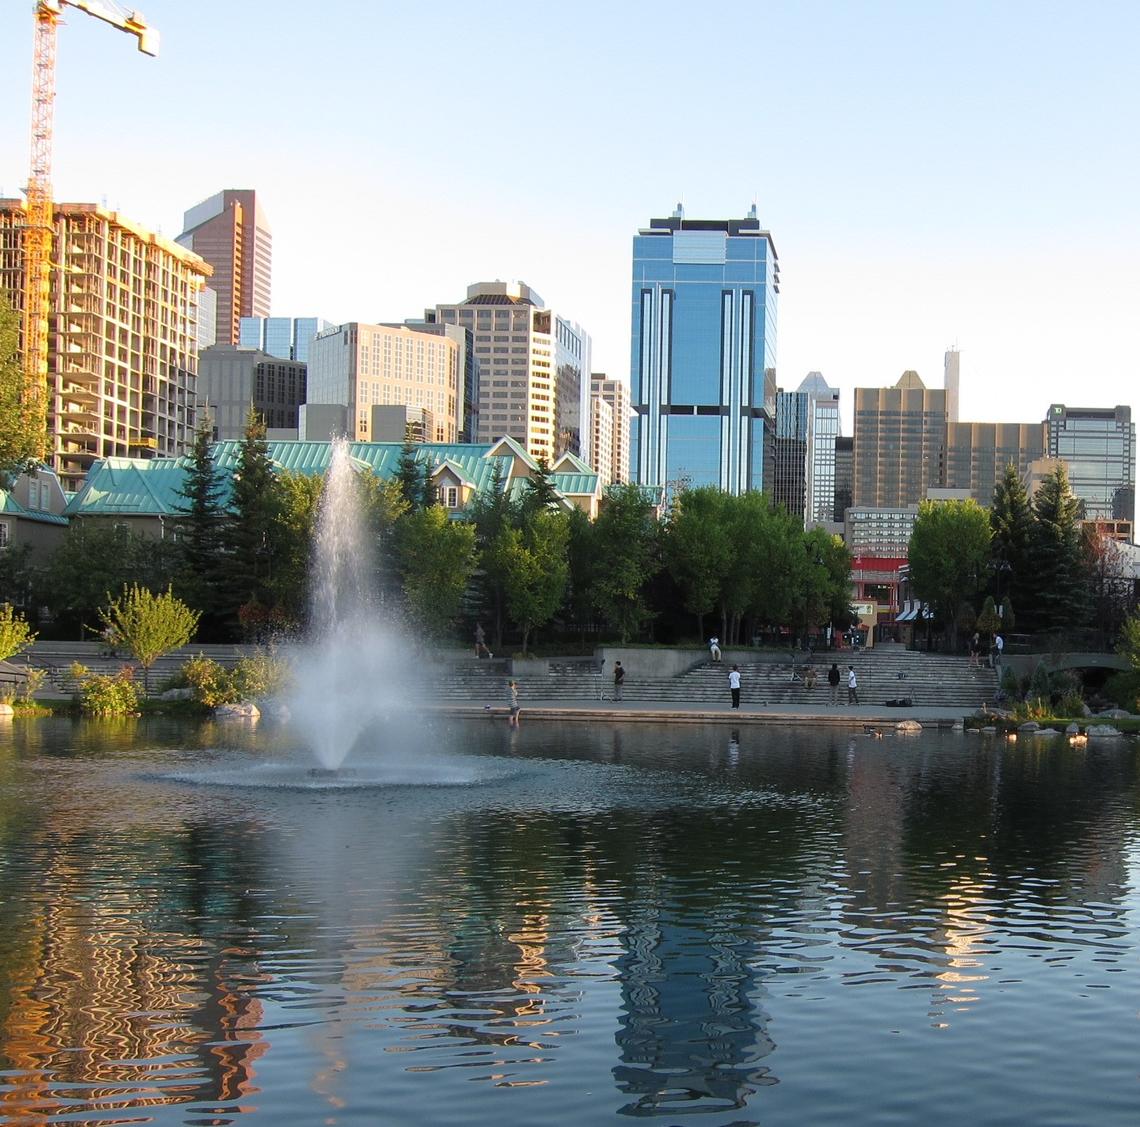 Water brings life to the city of Calgary